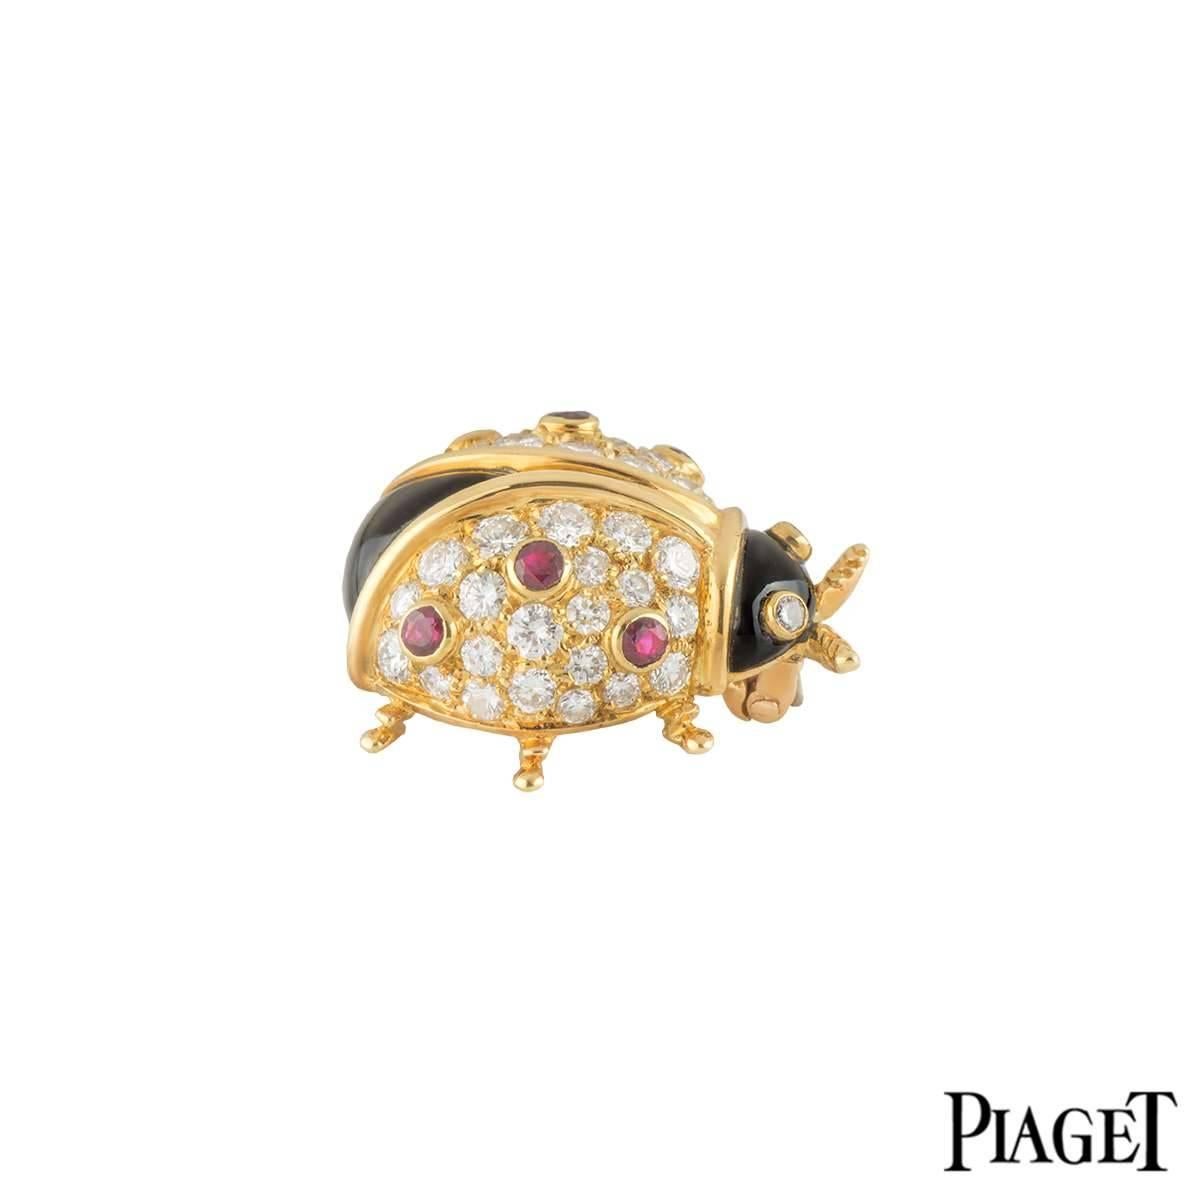 An 18k yellow gold Ladybird brooch by Piaget. The Ladybird is set to the back with 42 round brilliant cut diamonds totalling approximately 0.86ct, with a further 2 diamonds set to the eyes totalling 0.03ct, complimented by black enamel sections for